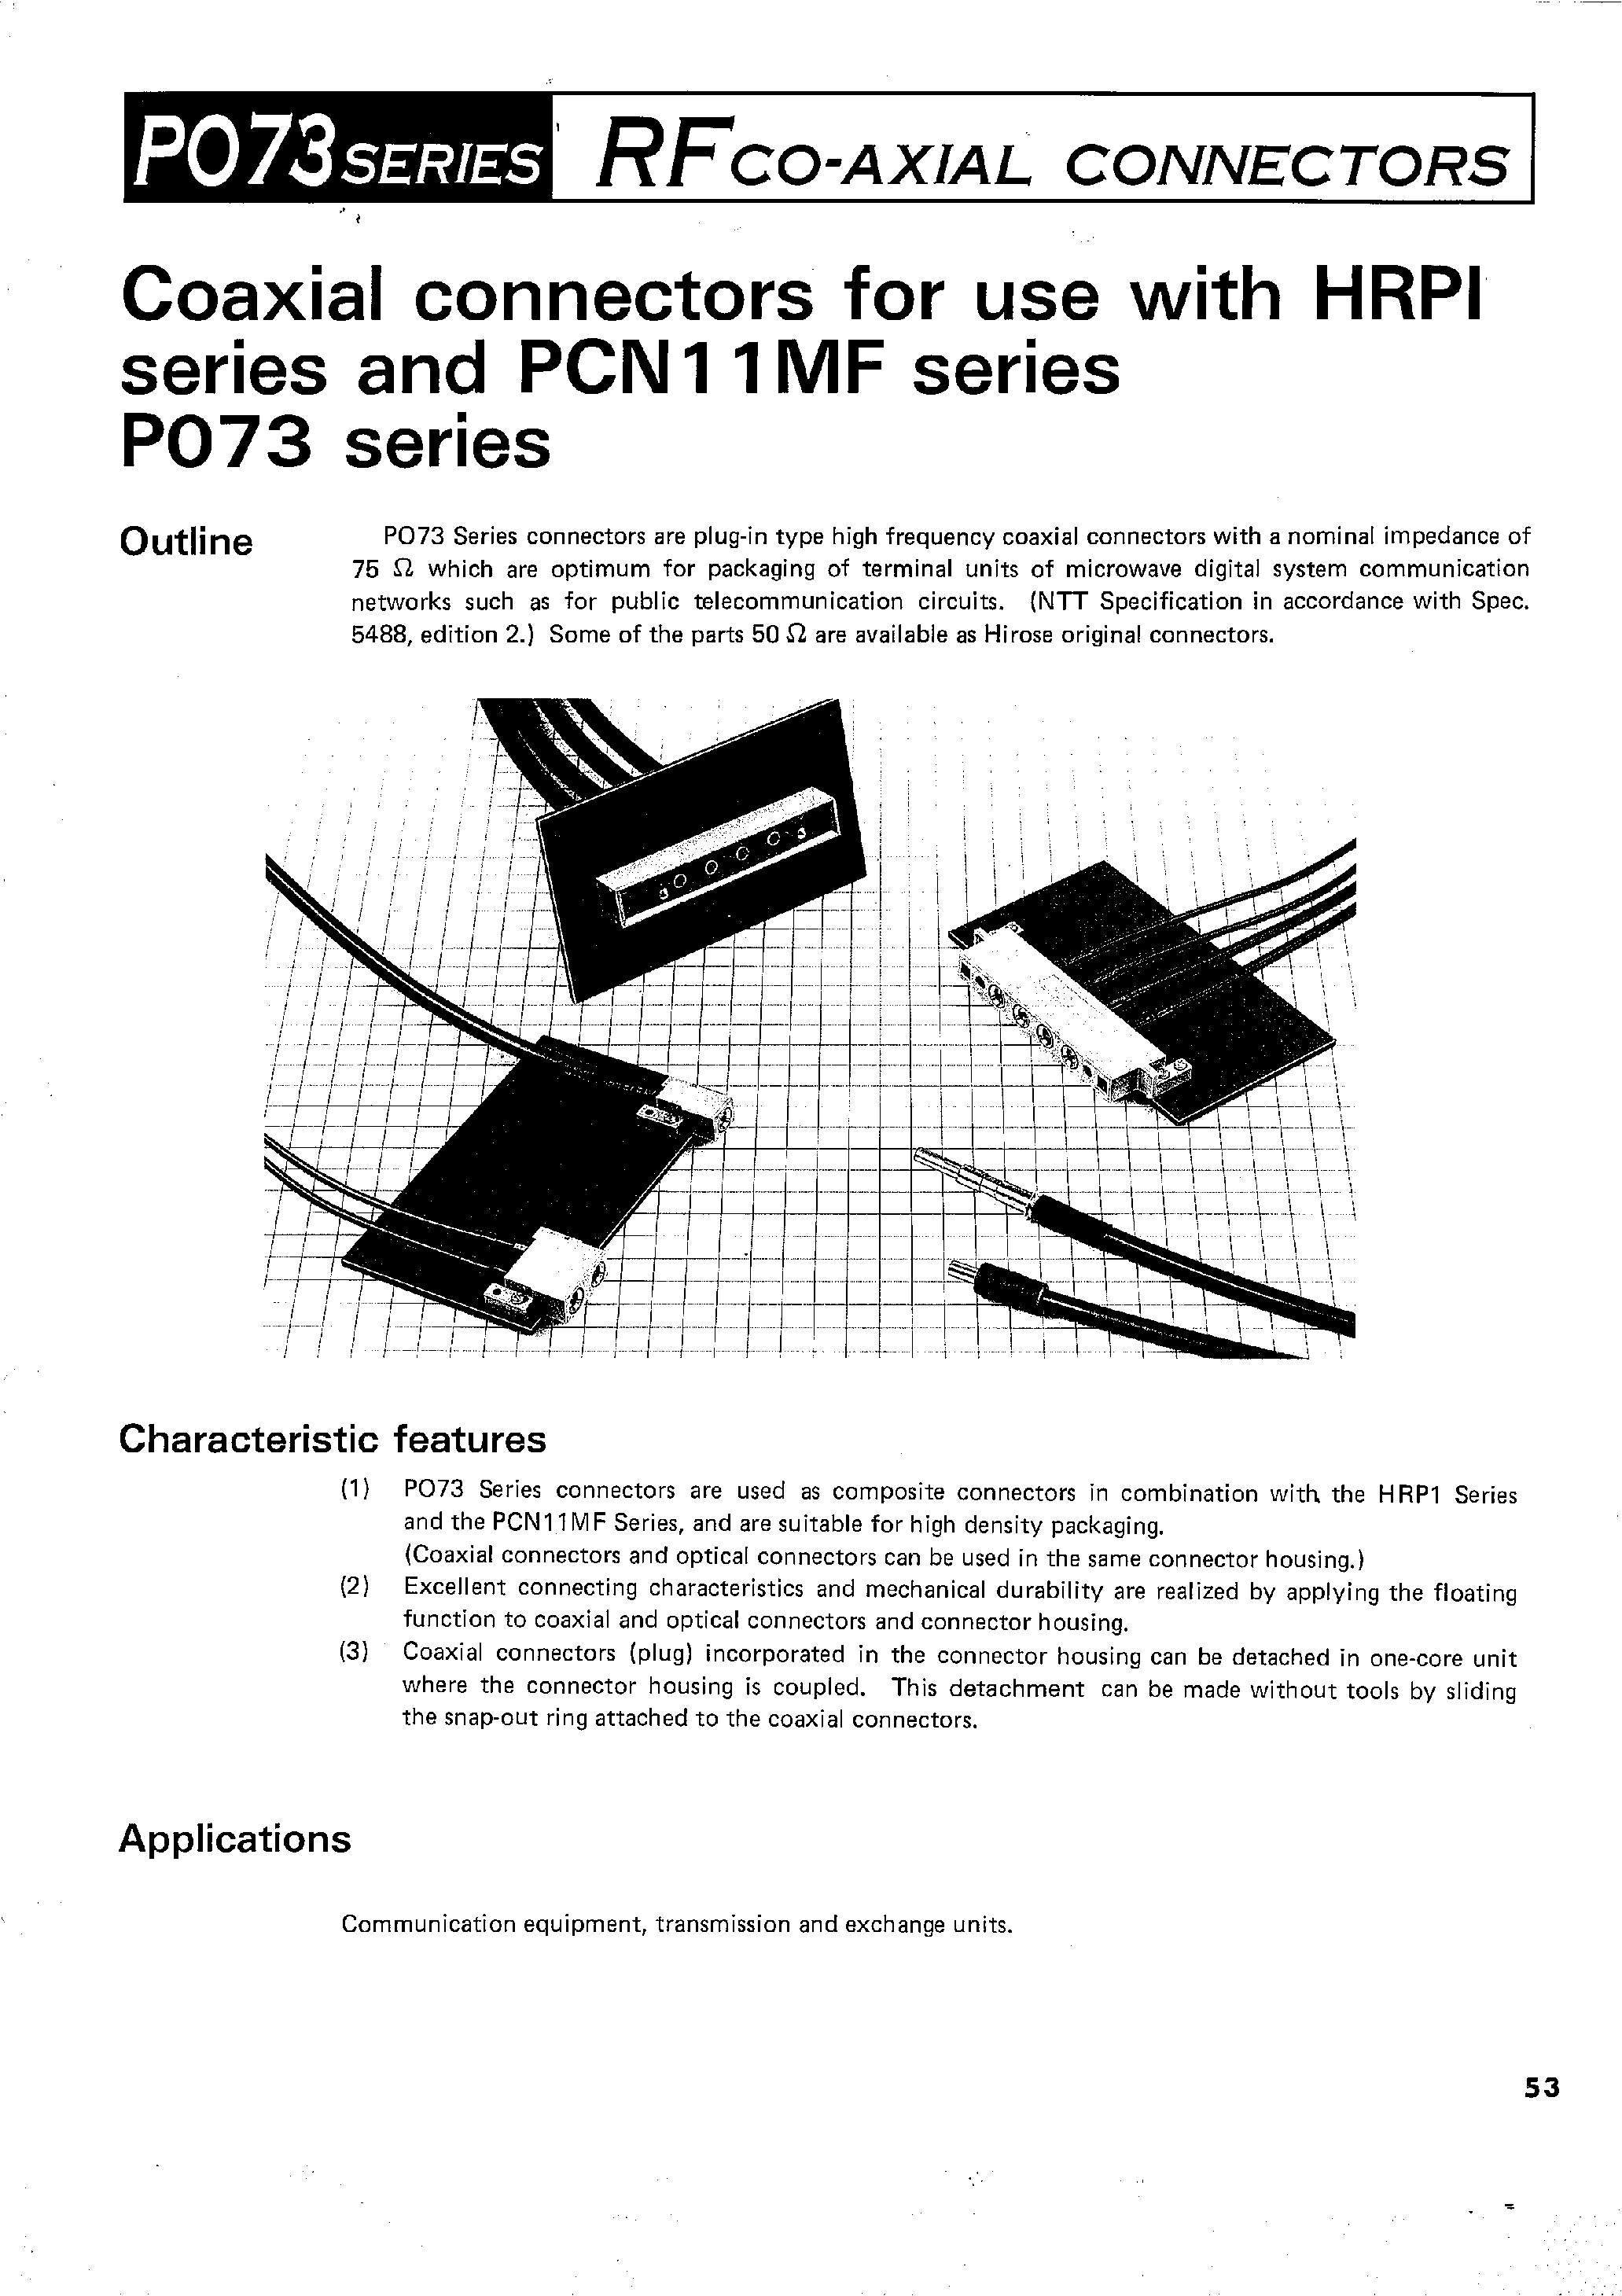 Даташит PO73D-P-2.5DW - RFCO-AXIAL CONNECTORS(COAXIAL CONNECTORS for use with HRPI) страница 1